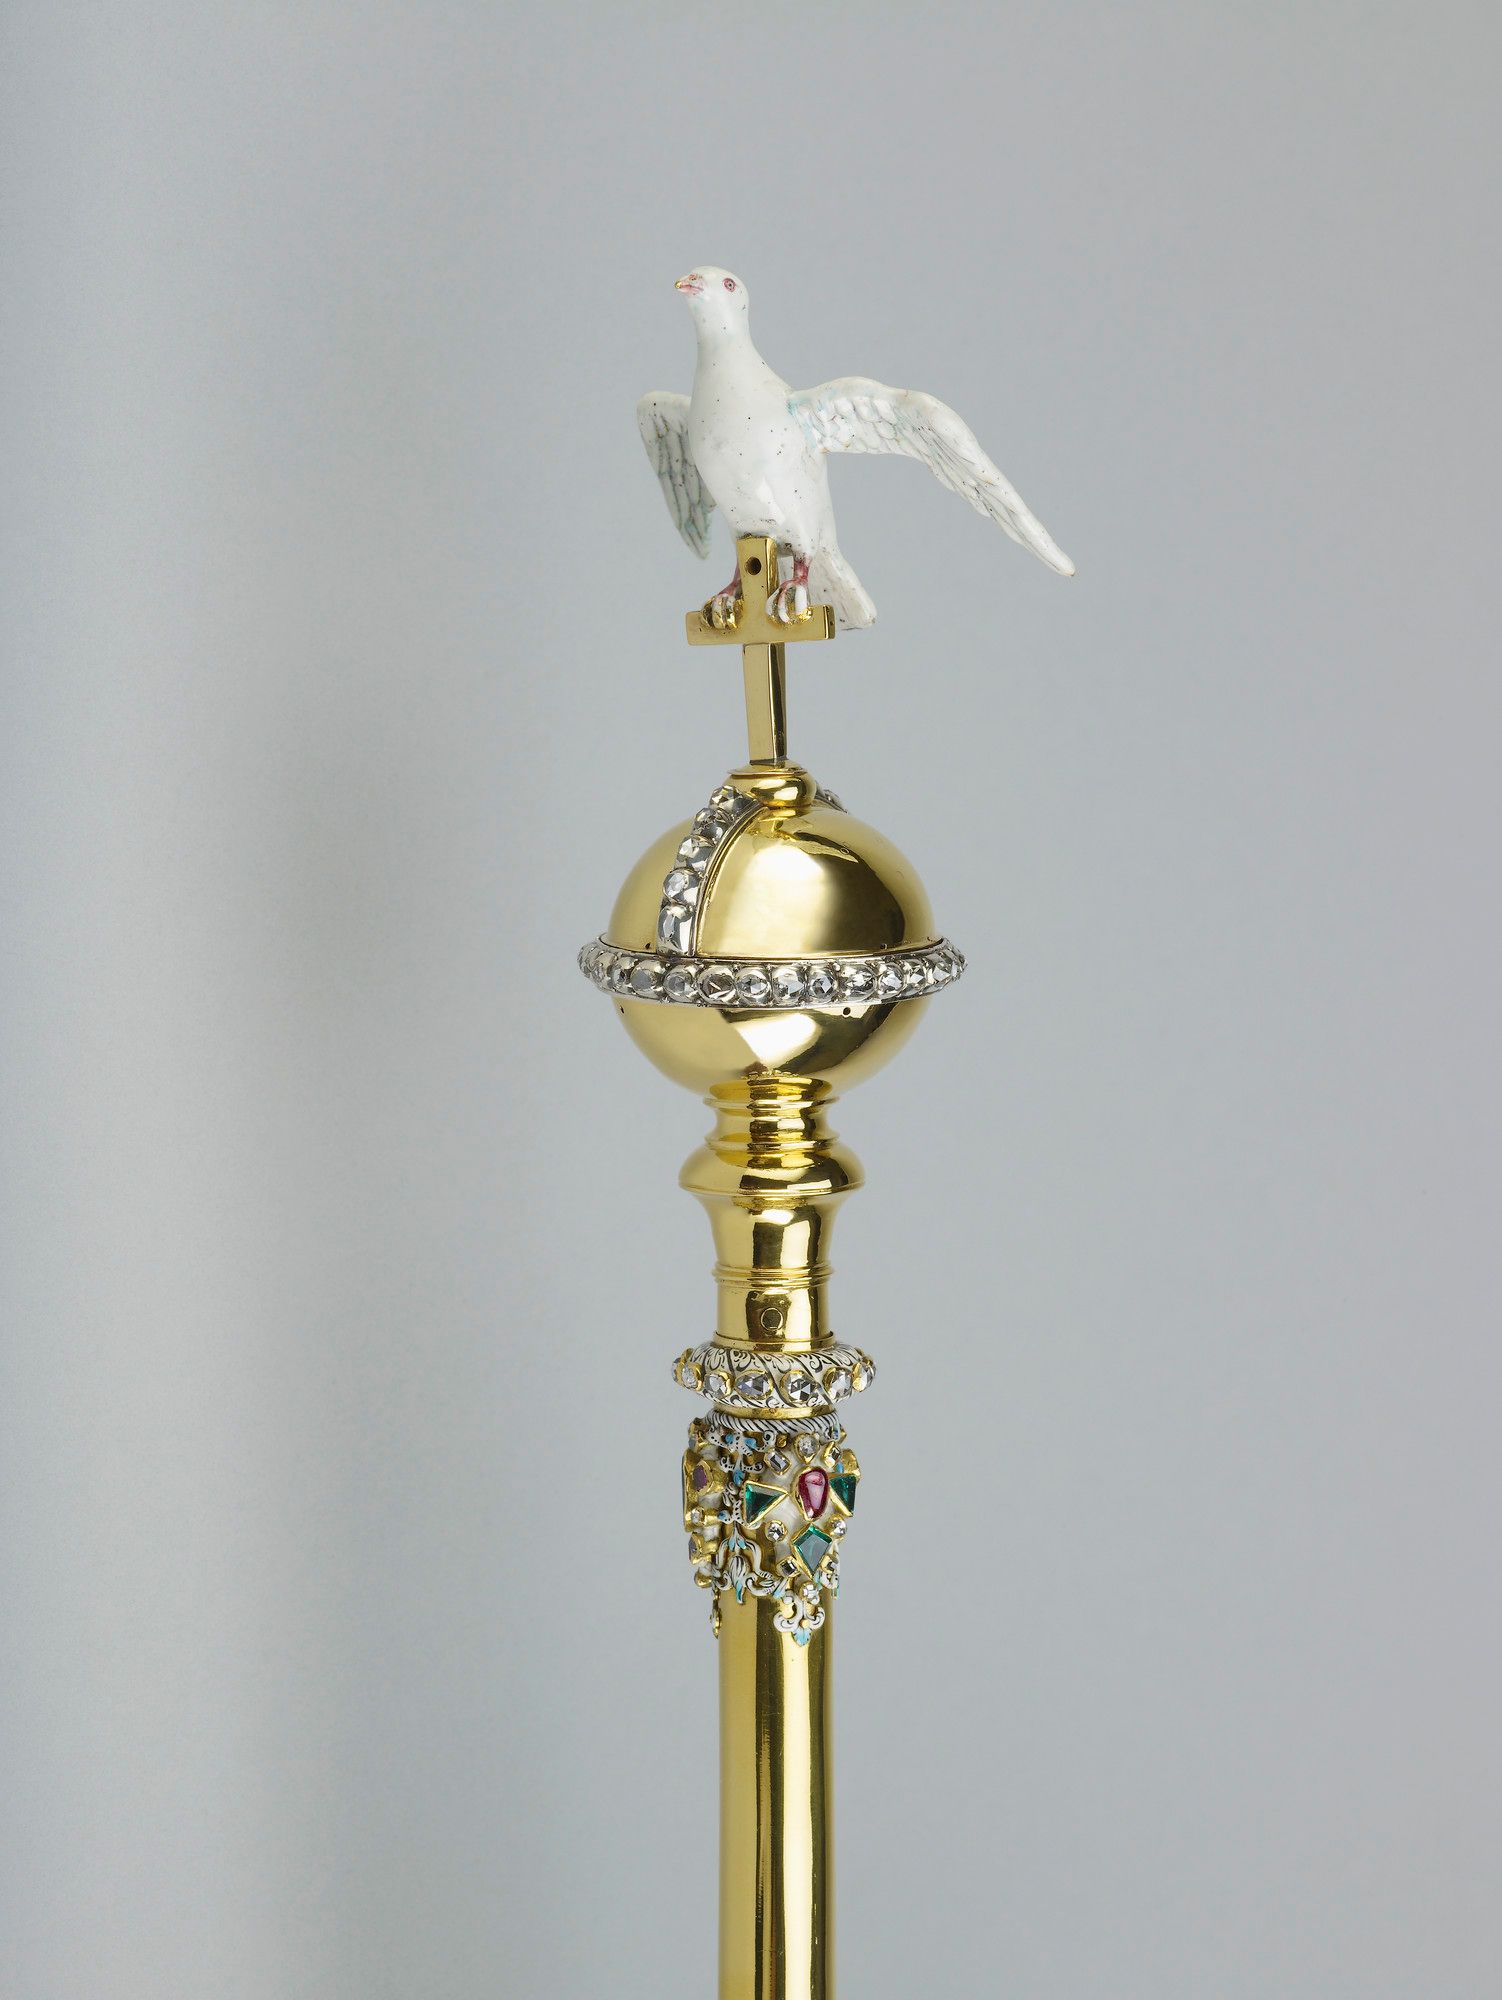 The Sovereign's Sceptre with dove, 1661.